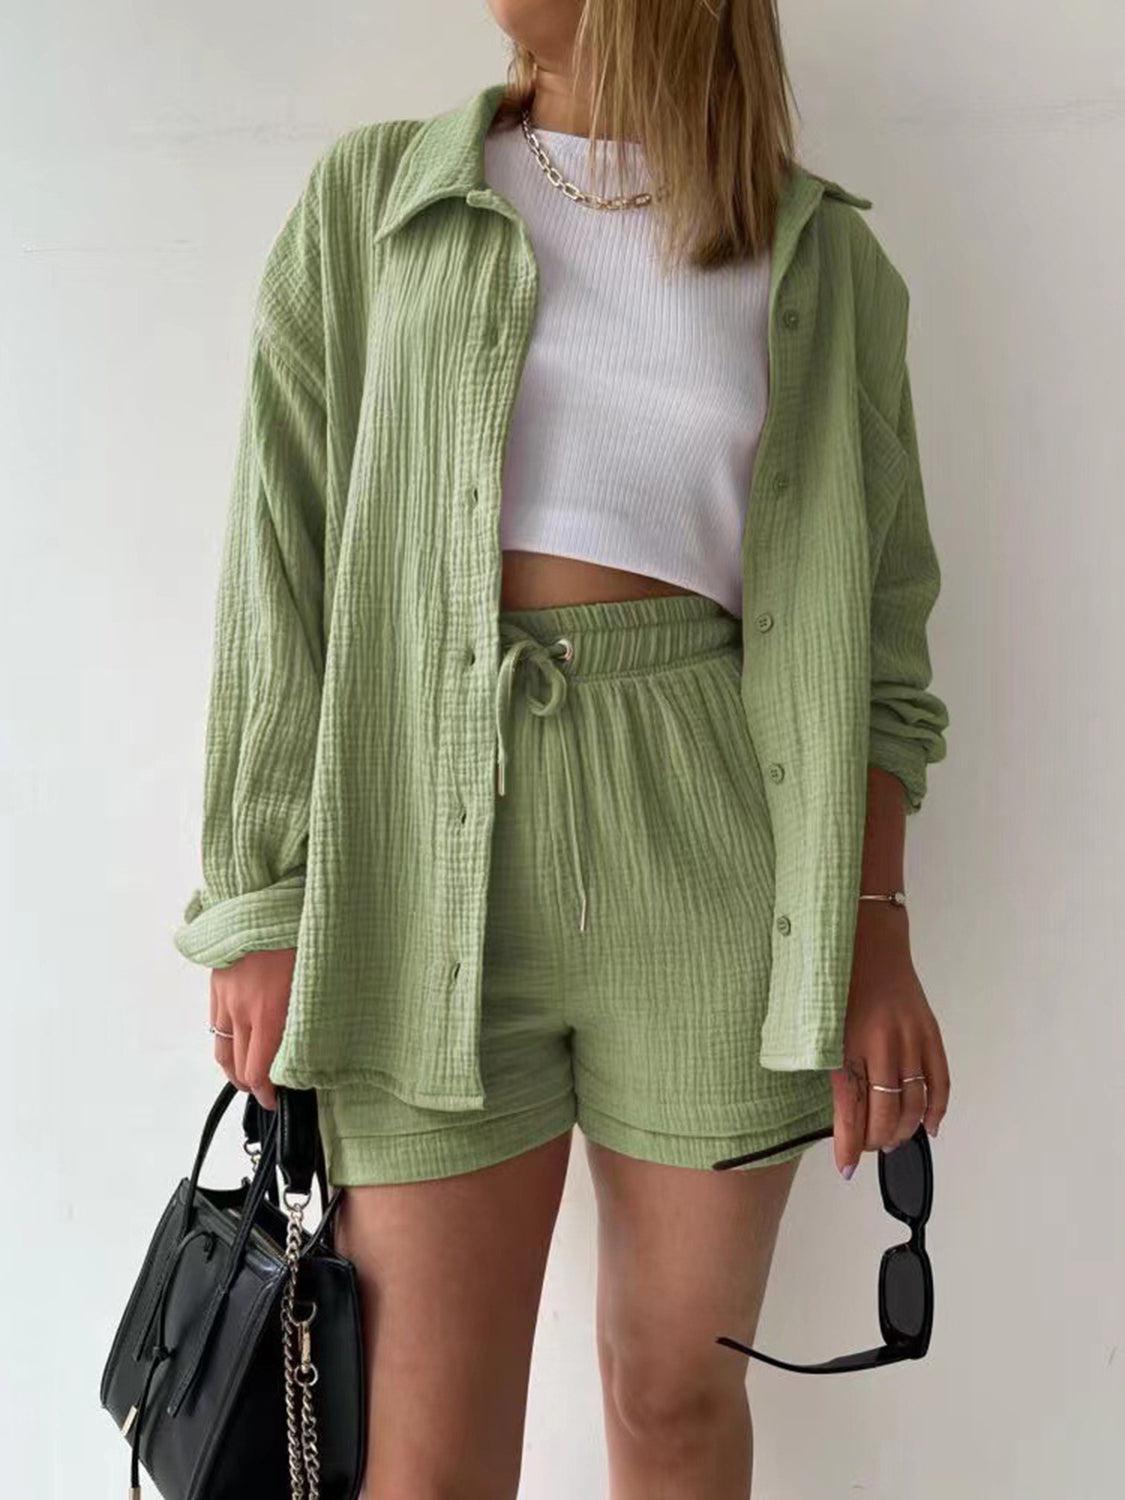 a woman wearing a green jacket and shorts